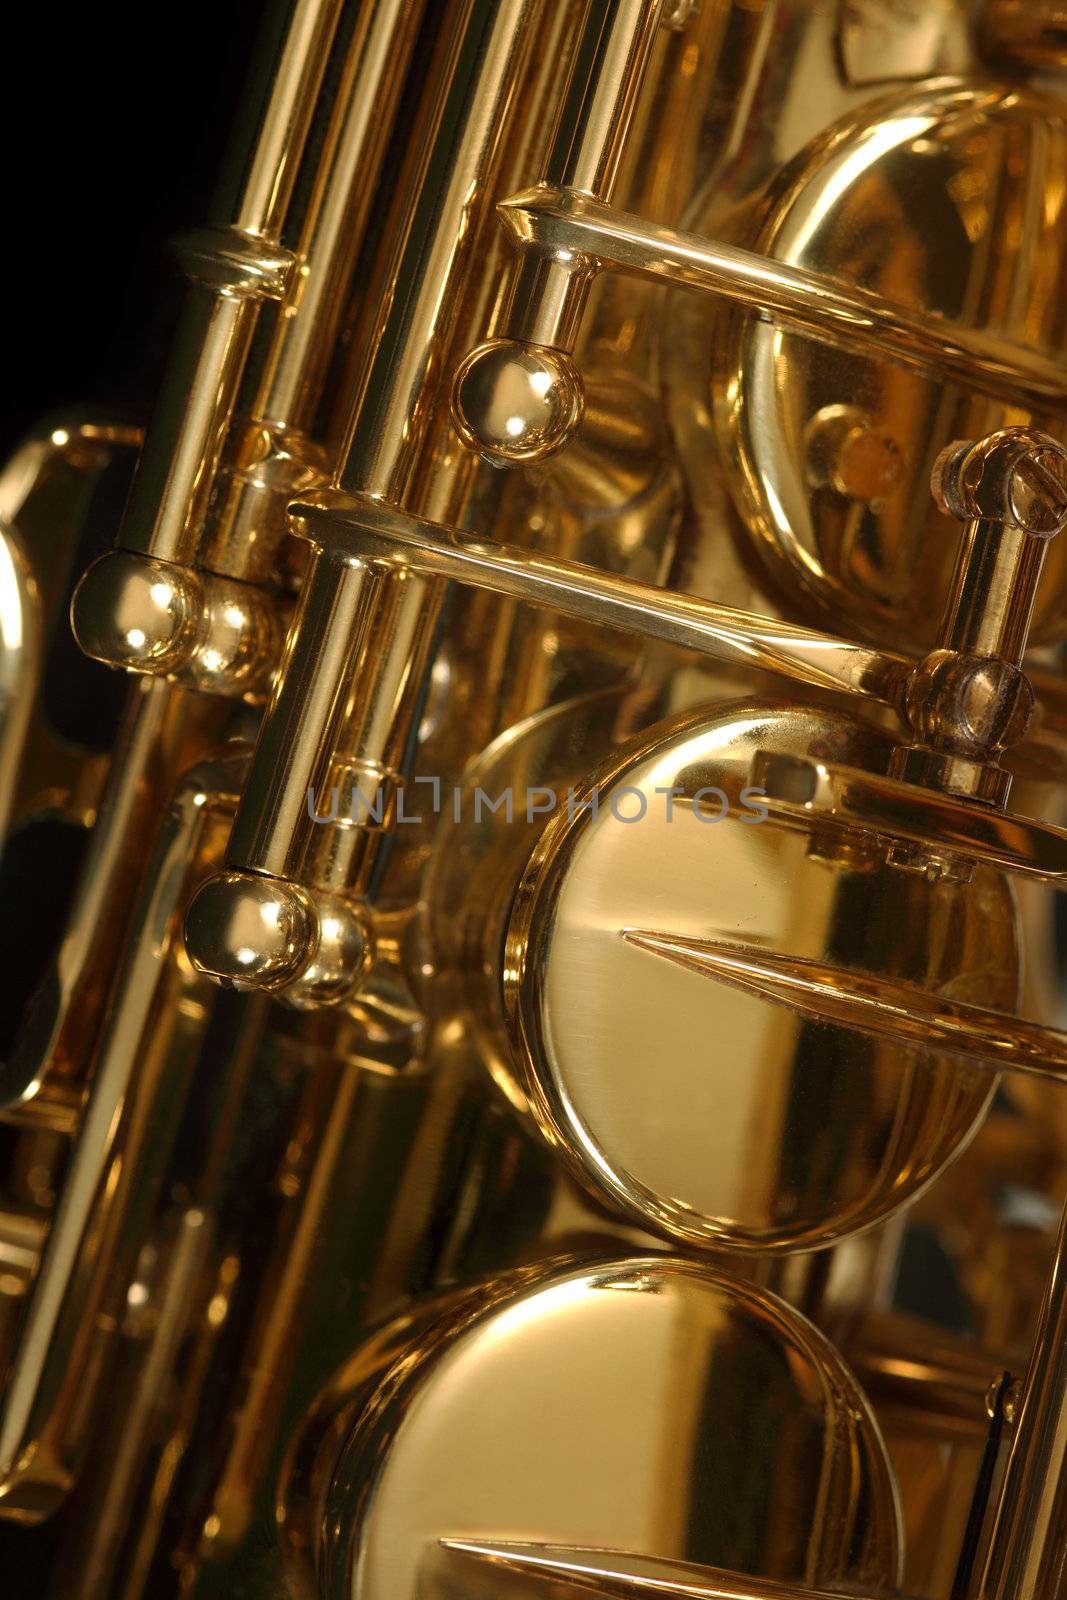 Macro image of the valves and keys of a saxophone.
